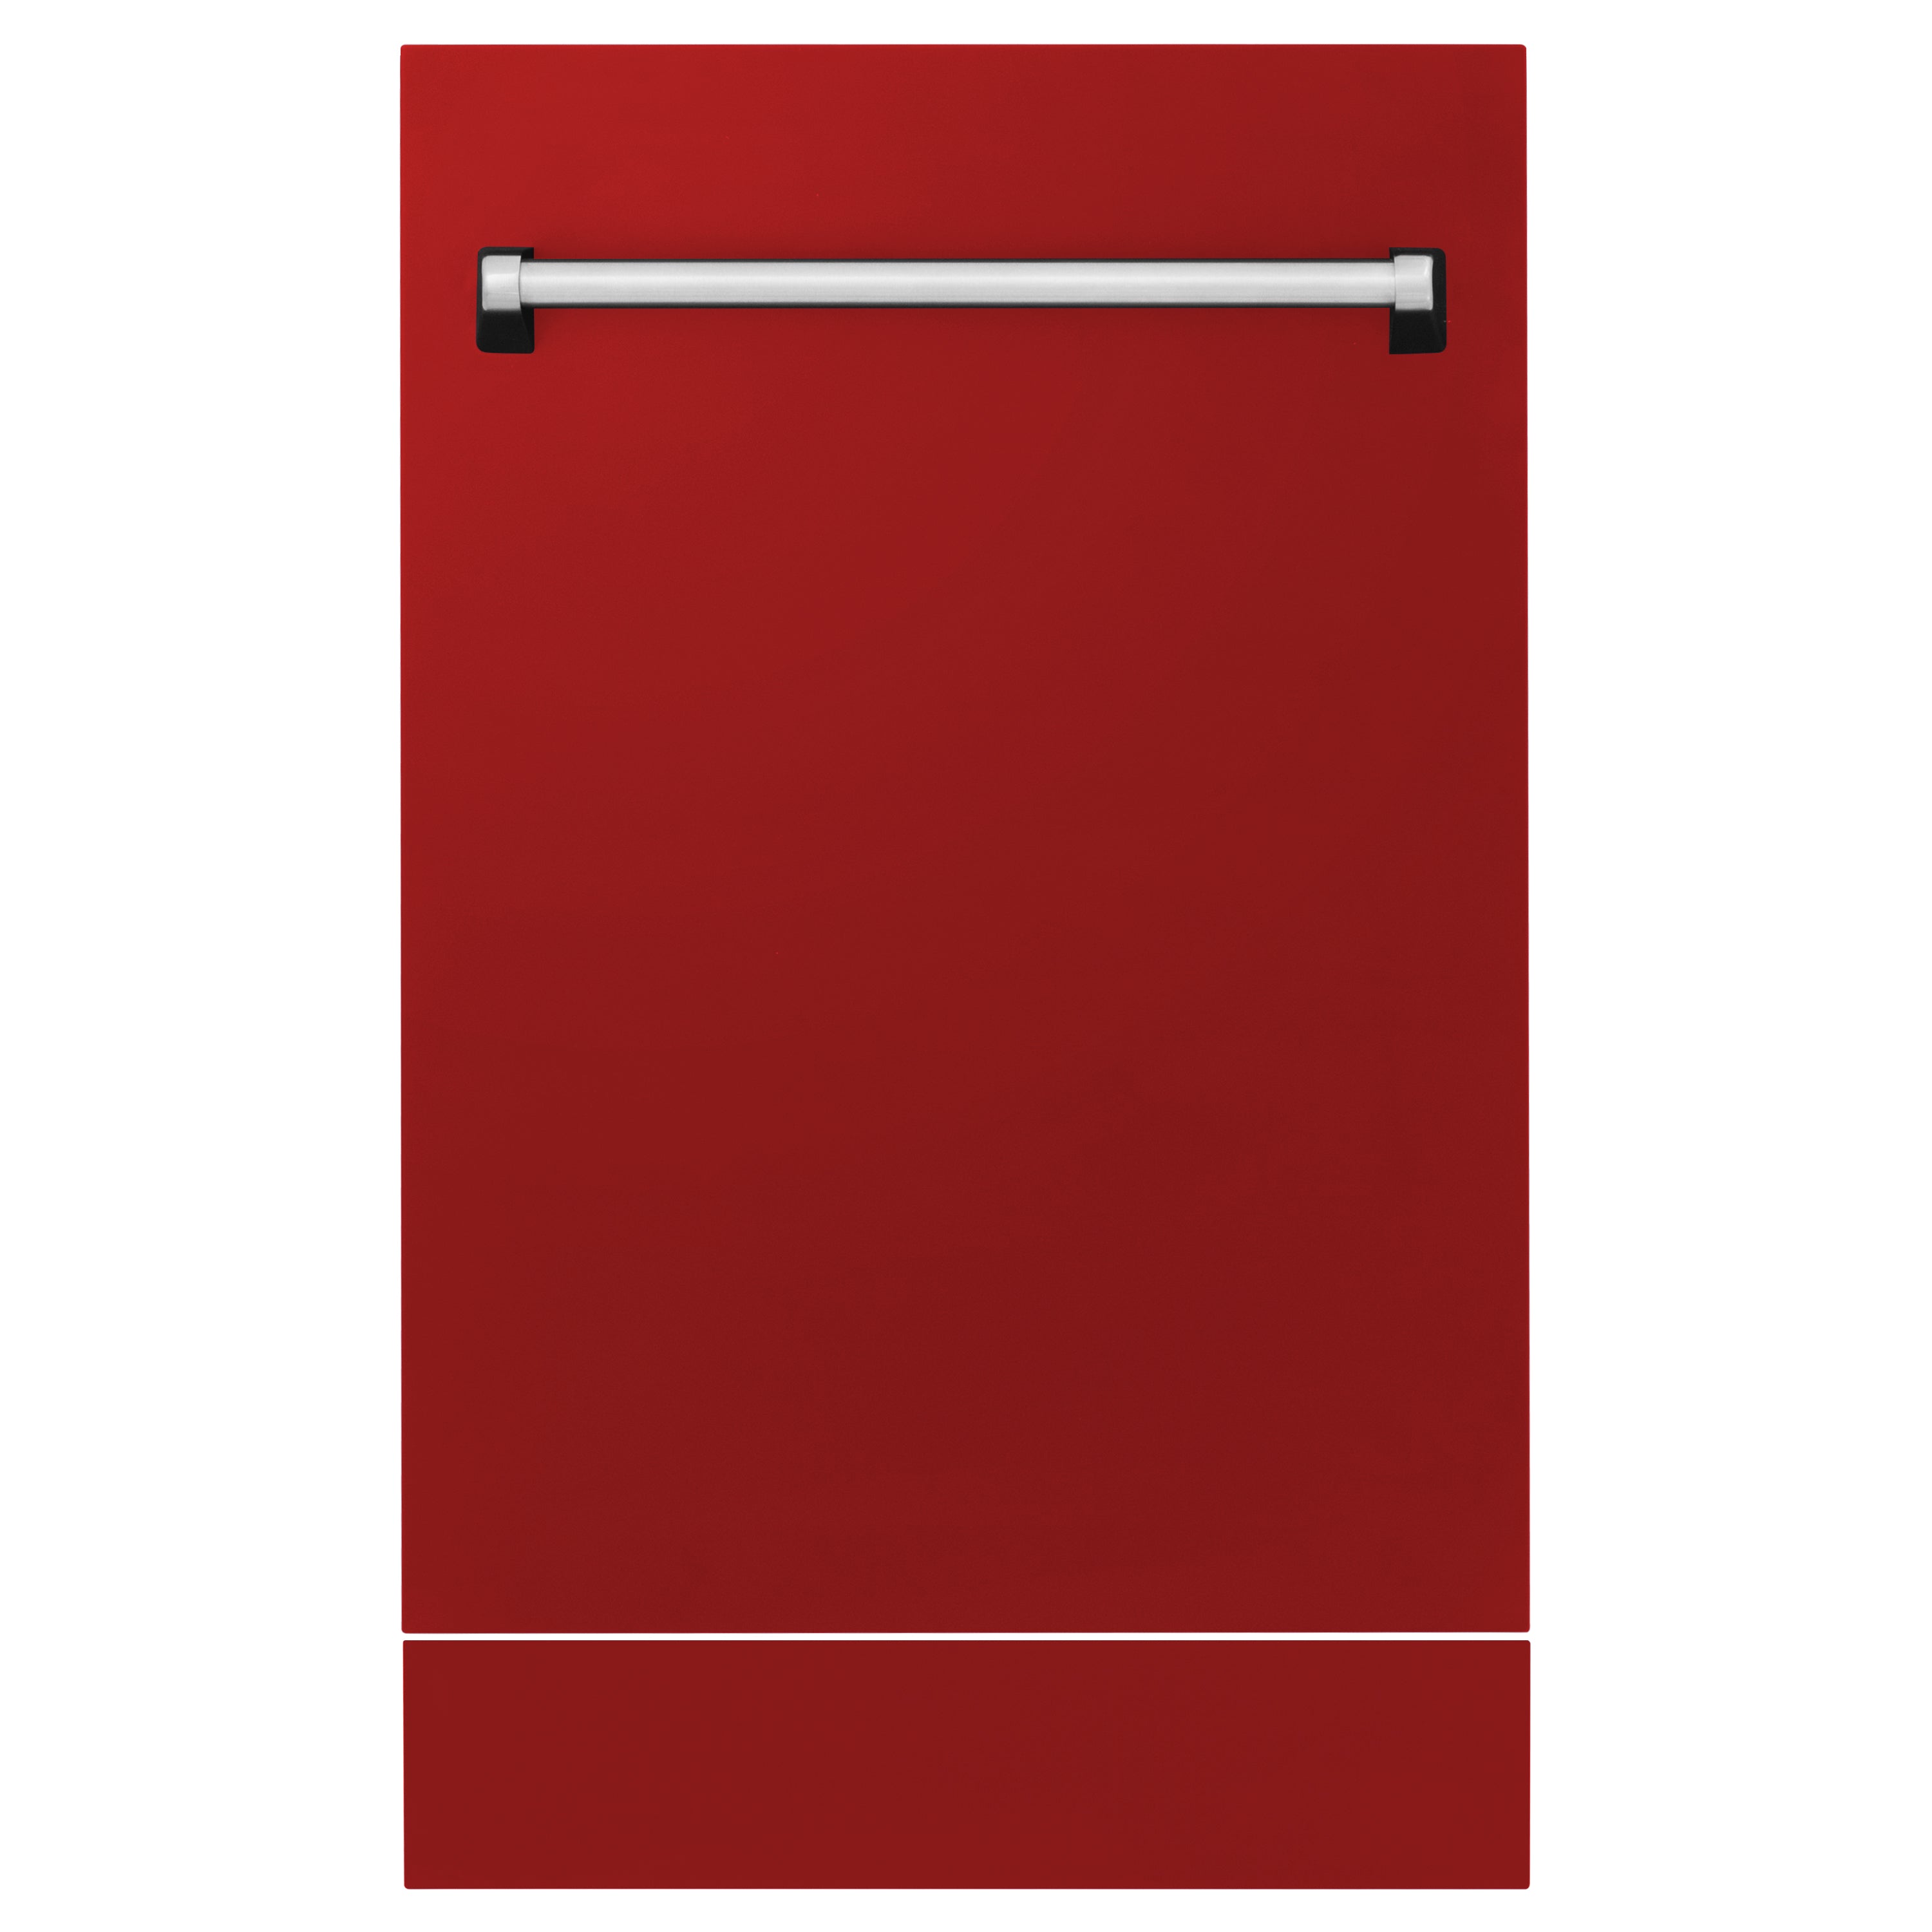 ZLINE 18" Tallac Dishwasher Panel in Red Gloss with Traditional Handle (DPV-RG-18)